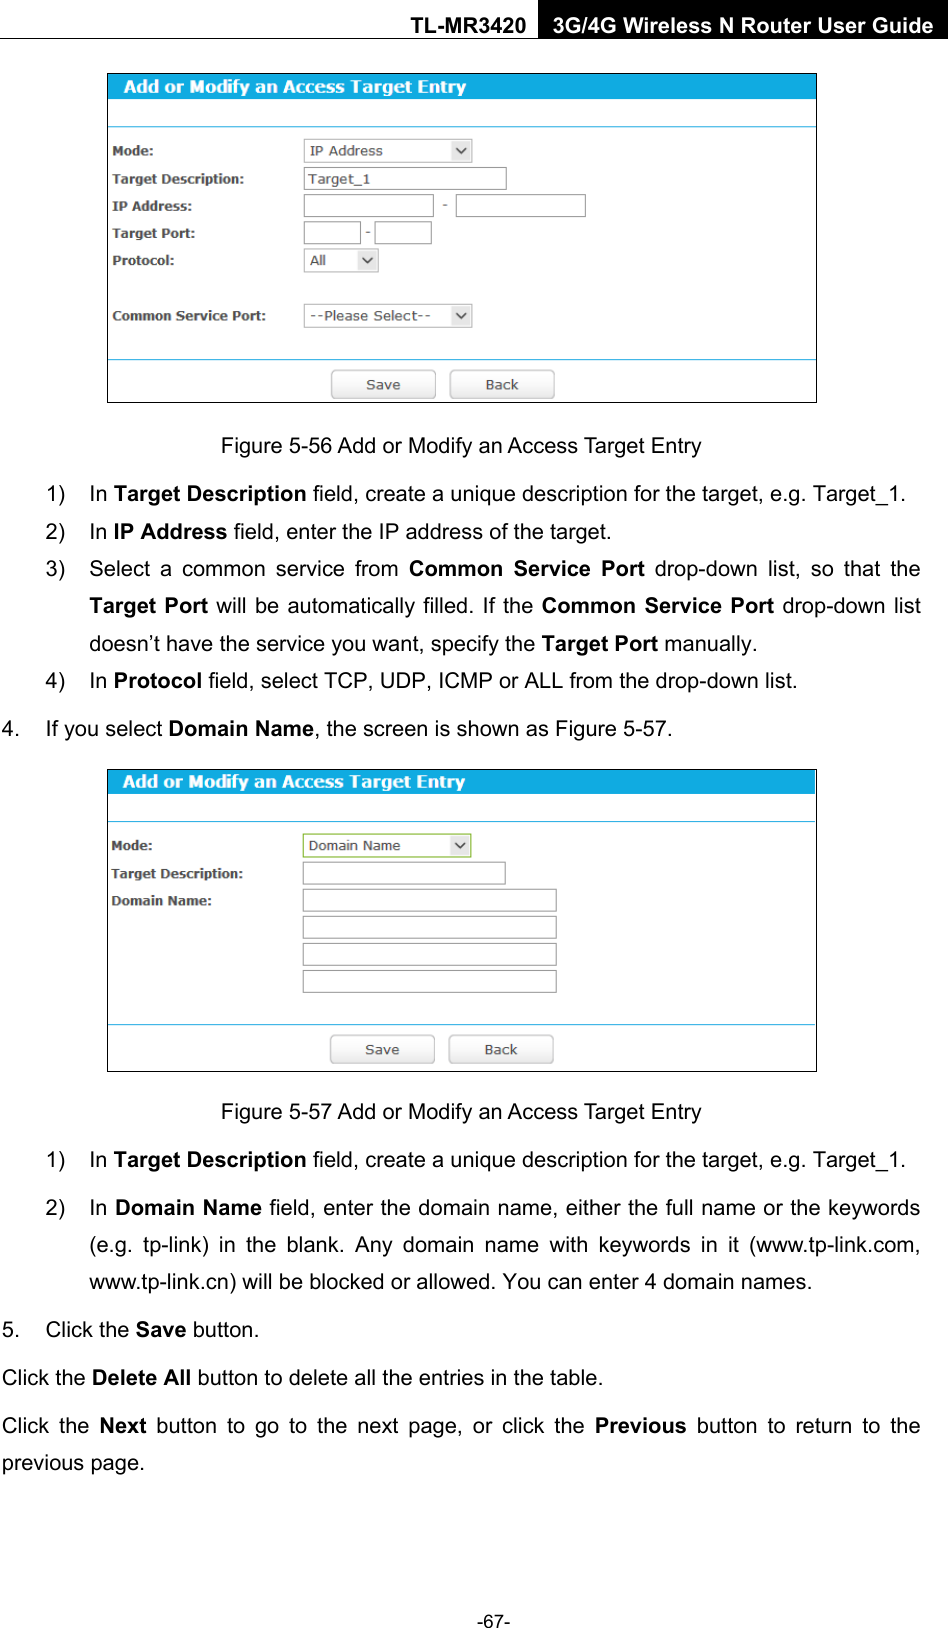    -67- TL-MR3420 3G/4G Wireless N Router User Guide  Figure 5-56 Add or Modify an Access Target Entry 1) In Target Description field, create a unique description for the target, e.g. Target_1. 2) In IP Address field, enter the IP address of the target. 3) Select a common service from Common Service Port drop-down list, so that the Target Port will be automatically filled. If the Common Service Port drop-down list doesn’t have the service you want, specify the Target Port manually. 4) In Protocol field, select TCP, UDP, ICMP or ALL from the drop-down list.  4. If you select Domain Name, the screen is shown as Figure 5-57.  Figure 5-57 Add or Modify an Access Target Entry 1) In Target Description field, create a unique description for the target, e.g. Target_1. 2) In Domain Name field, enter the domain name, either the full name or the keywords (e.g. tp-link) in the blank. Any domain name with keywords in it (www.tp-link.com, www.tp-link.cn) will be blocked or allowed. You can enter 4 domain names. 5. Click the Save button. Click the Delete All button to delete all the entries in the table. Click the Next button to go to the next page, or click the Previous button to return to the previous page. 